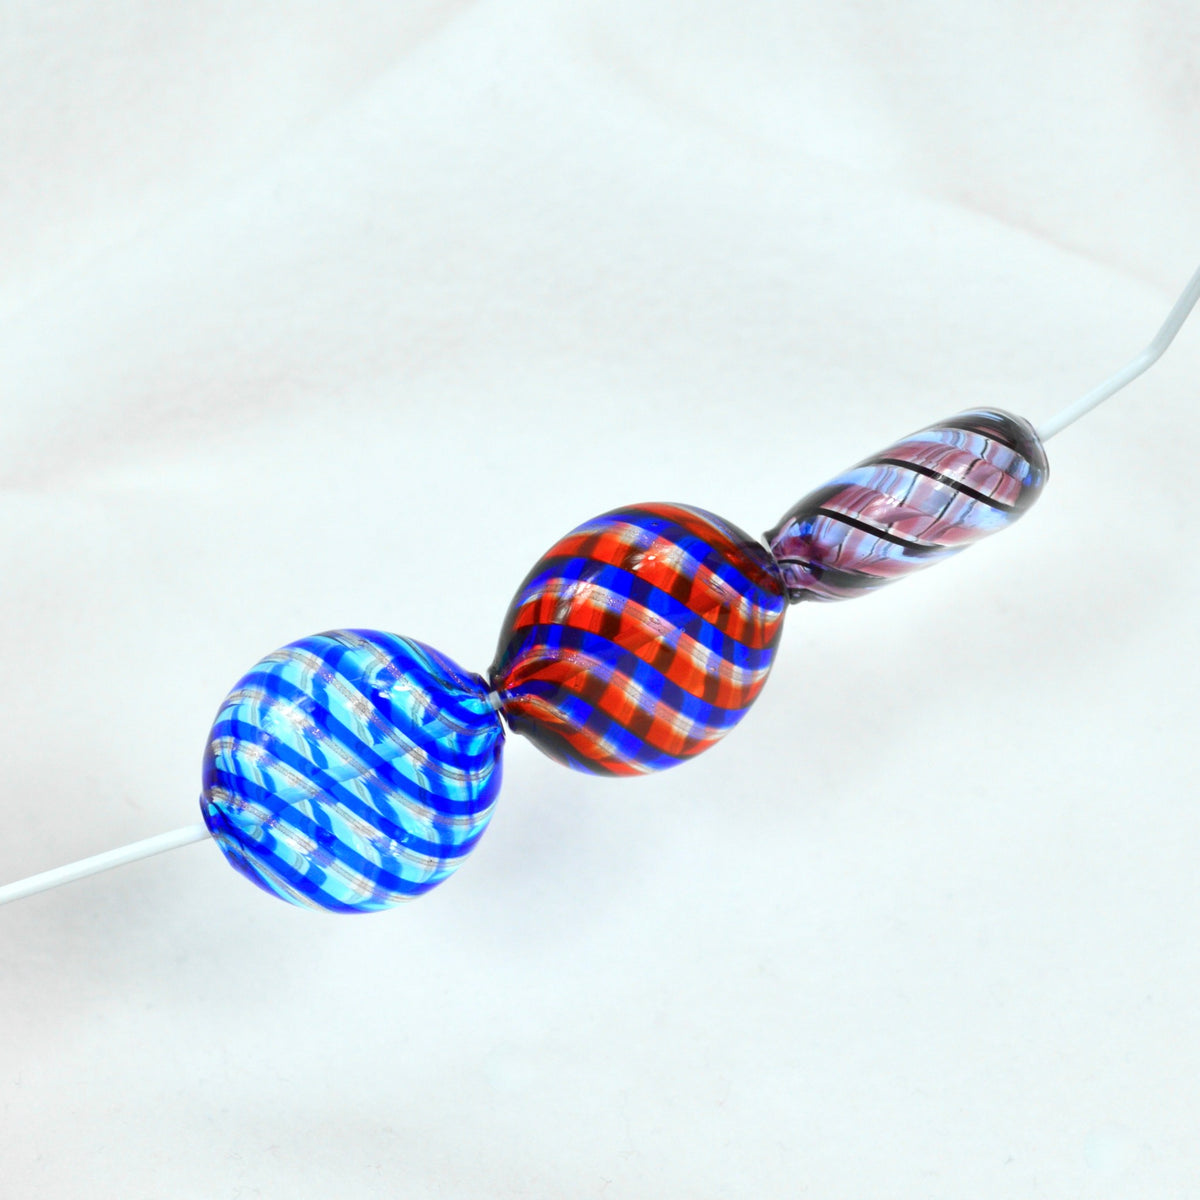 Murano Glass Blown Filigrana Penny Beads, Red or Blue, Made in Italy - My Italian Decor